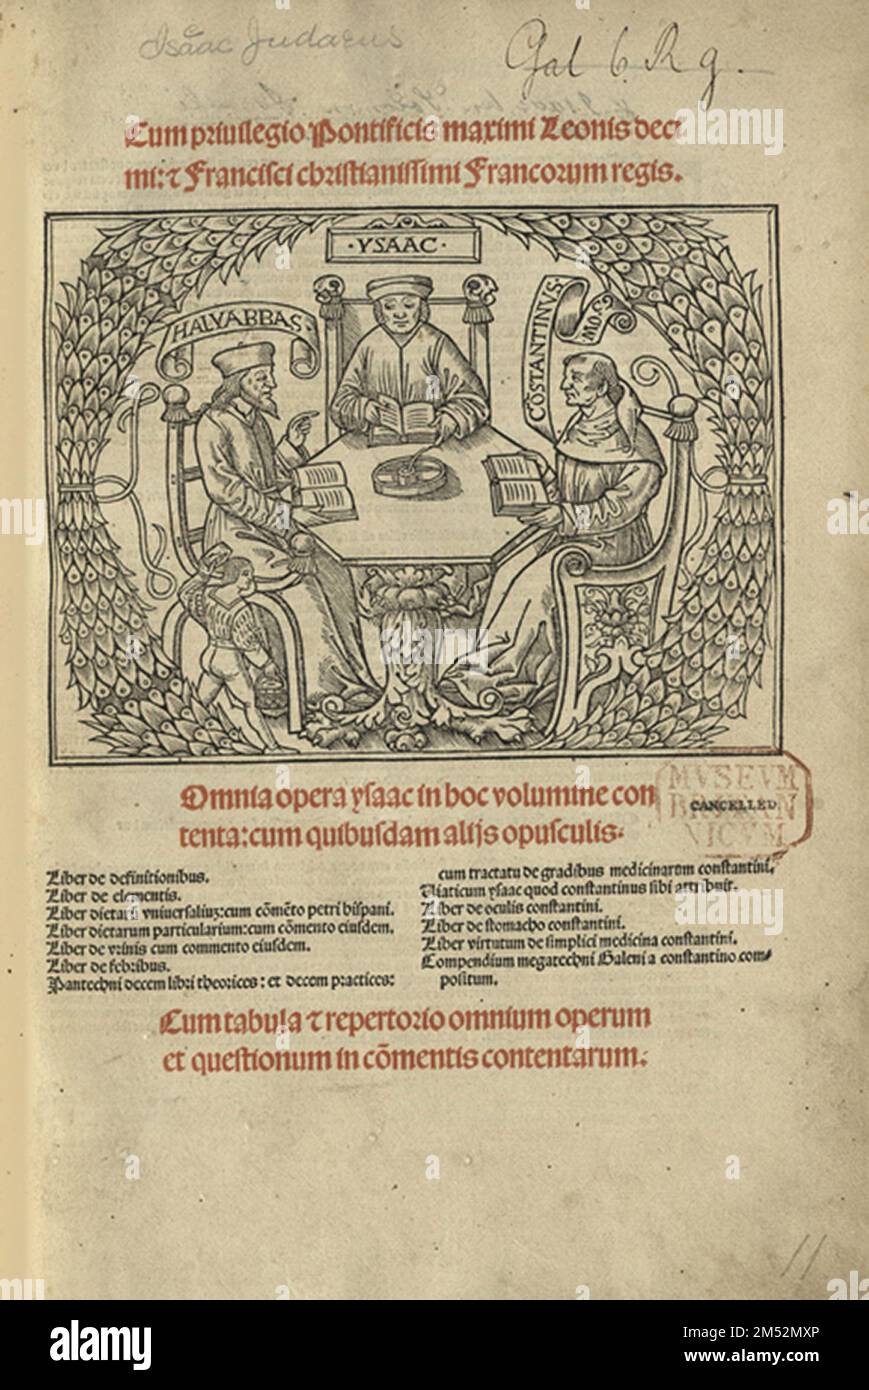 Title-page woodcut from the first printed edition of the collected works of Isaac Israeli, which includes the tract on fevers. The image depicts an impossible meeting of Isaac with his eleventh century commentators Constantine the African and Ibn Abi al-Rijal. Published 1515. Isaac Israeli ben Solomon  (c. 832 – c. 932), also known as Isaac Israeli the Elder and Isaac Judaeus, was one of the foremost Jewish physicians and philosophers living in the Arab world of his time. Stock Photo